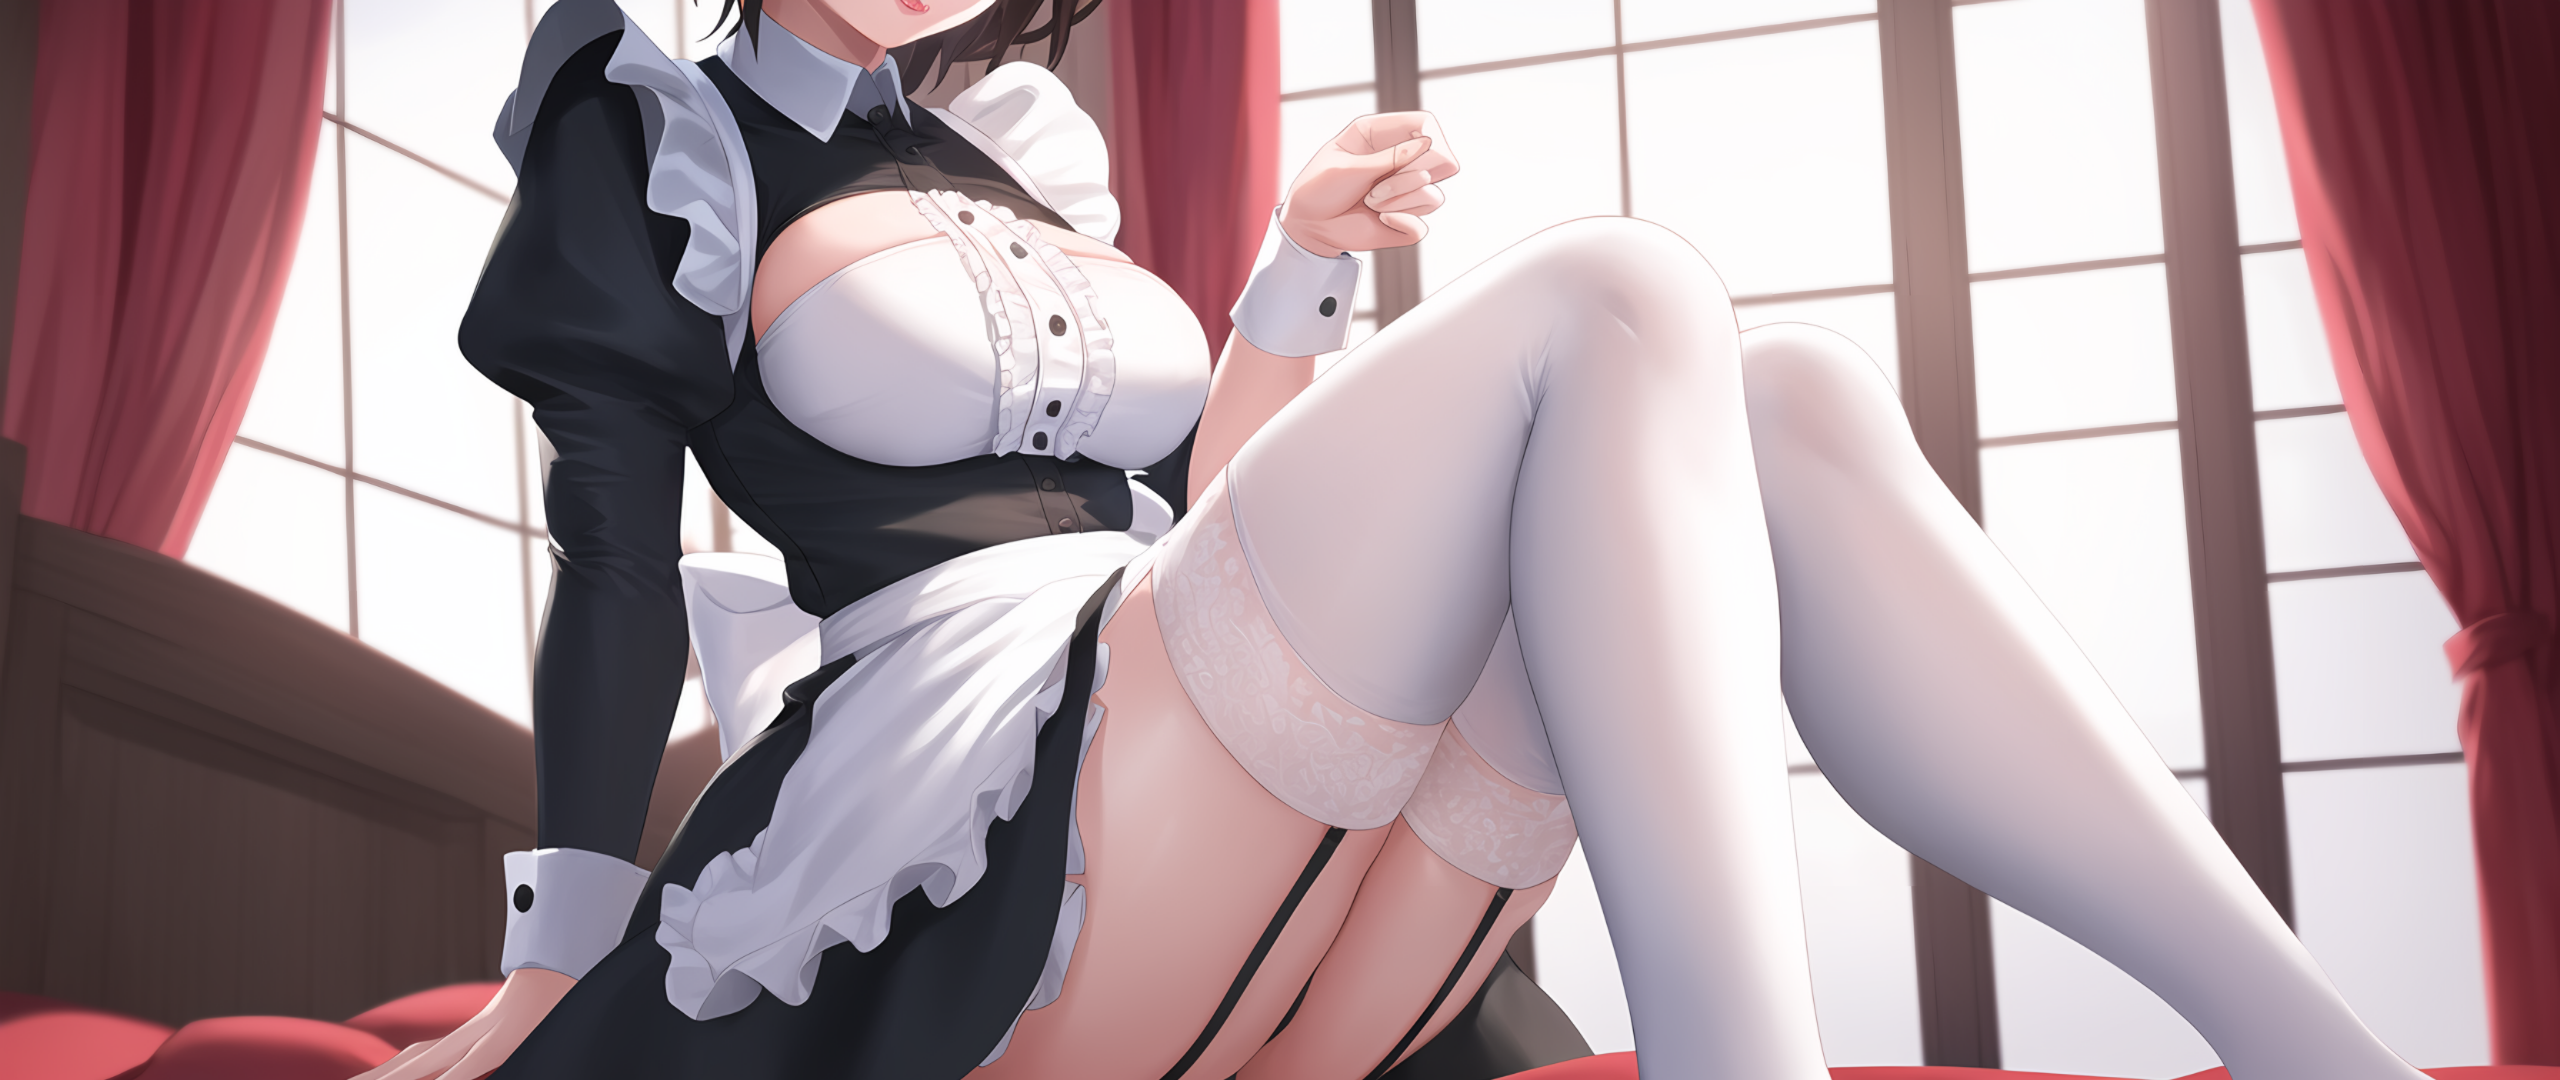 Anime 2560x1080 window frames maid AI art stockings anime girls indoors women indoors maid outfit garter straps eyes hidden bent legs wrist cuffs thighs in bed bed digital art sitting window white stockings legs frills curtains